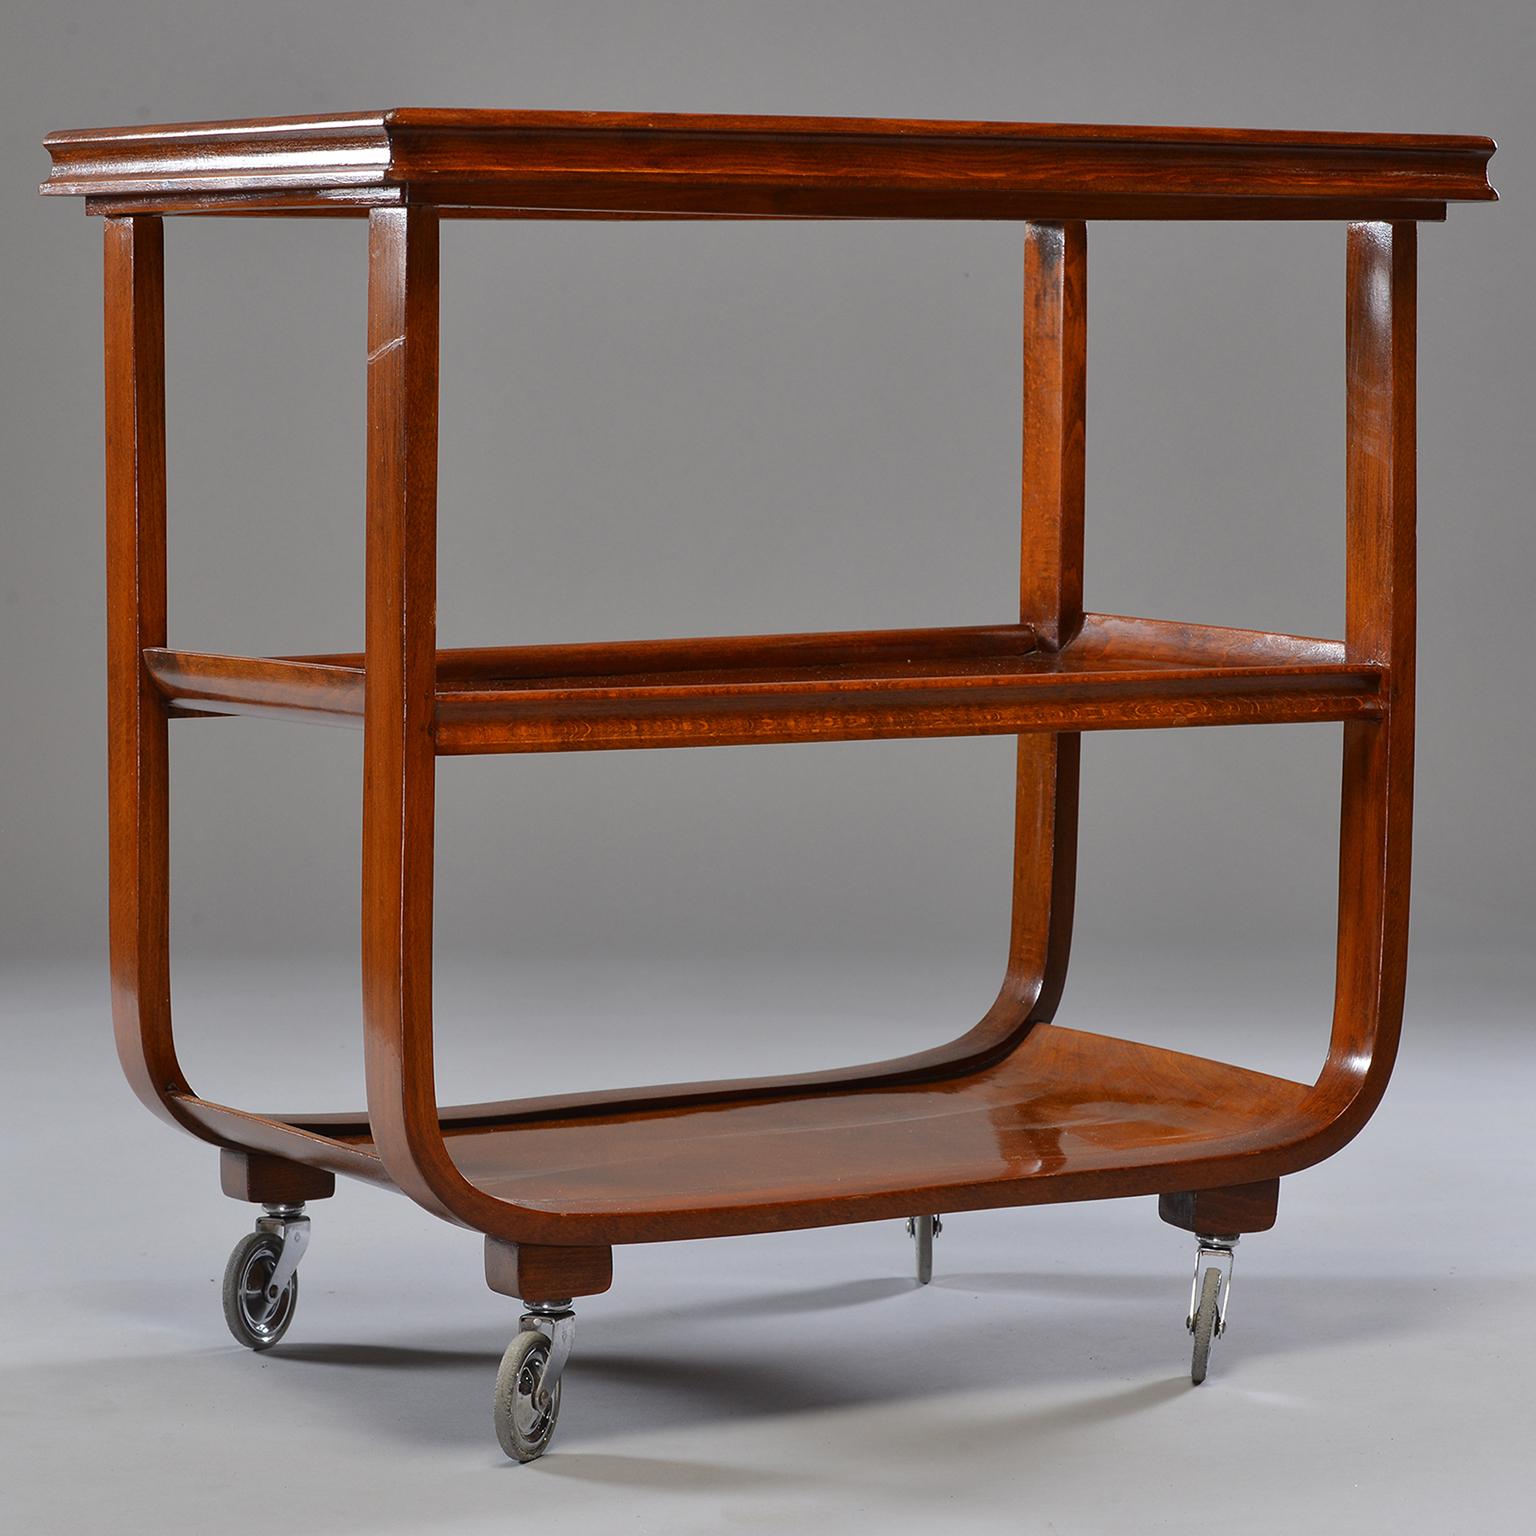 Bar or tea trolley made of dark stained wood with removable, glass-covered top tray. Found in England, circa 1940s. Unknown maker.